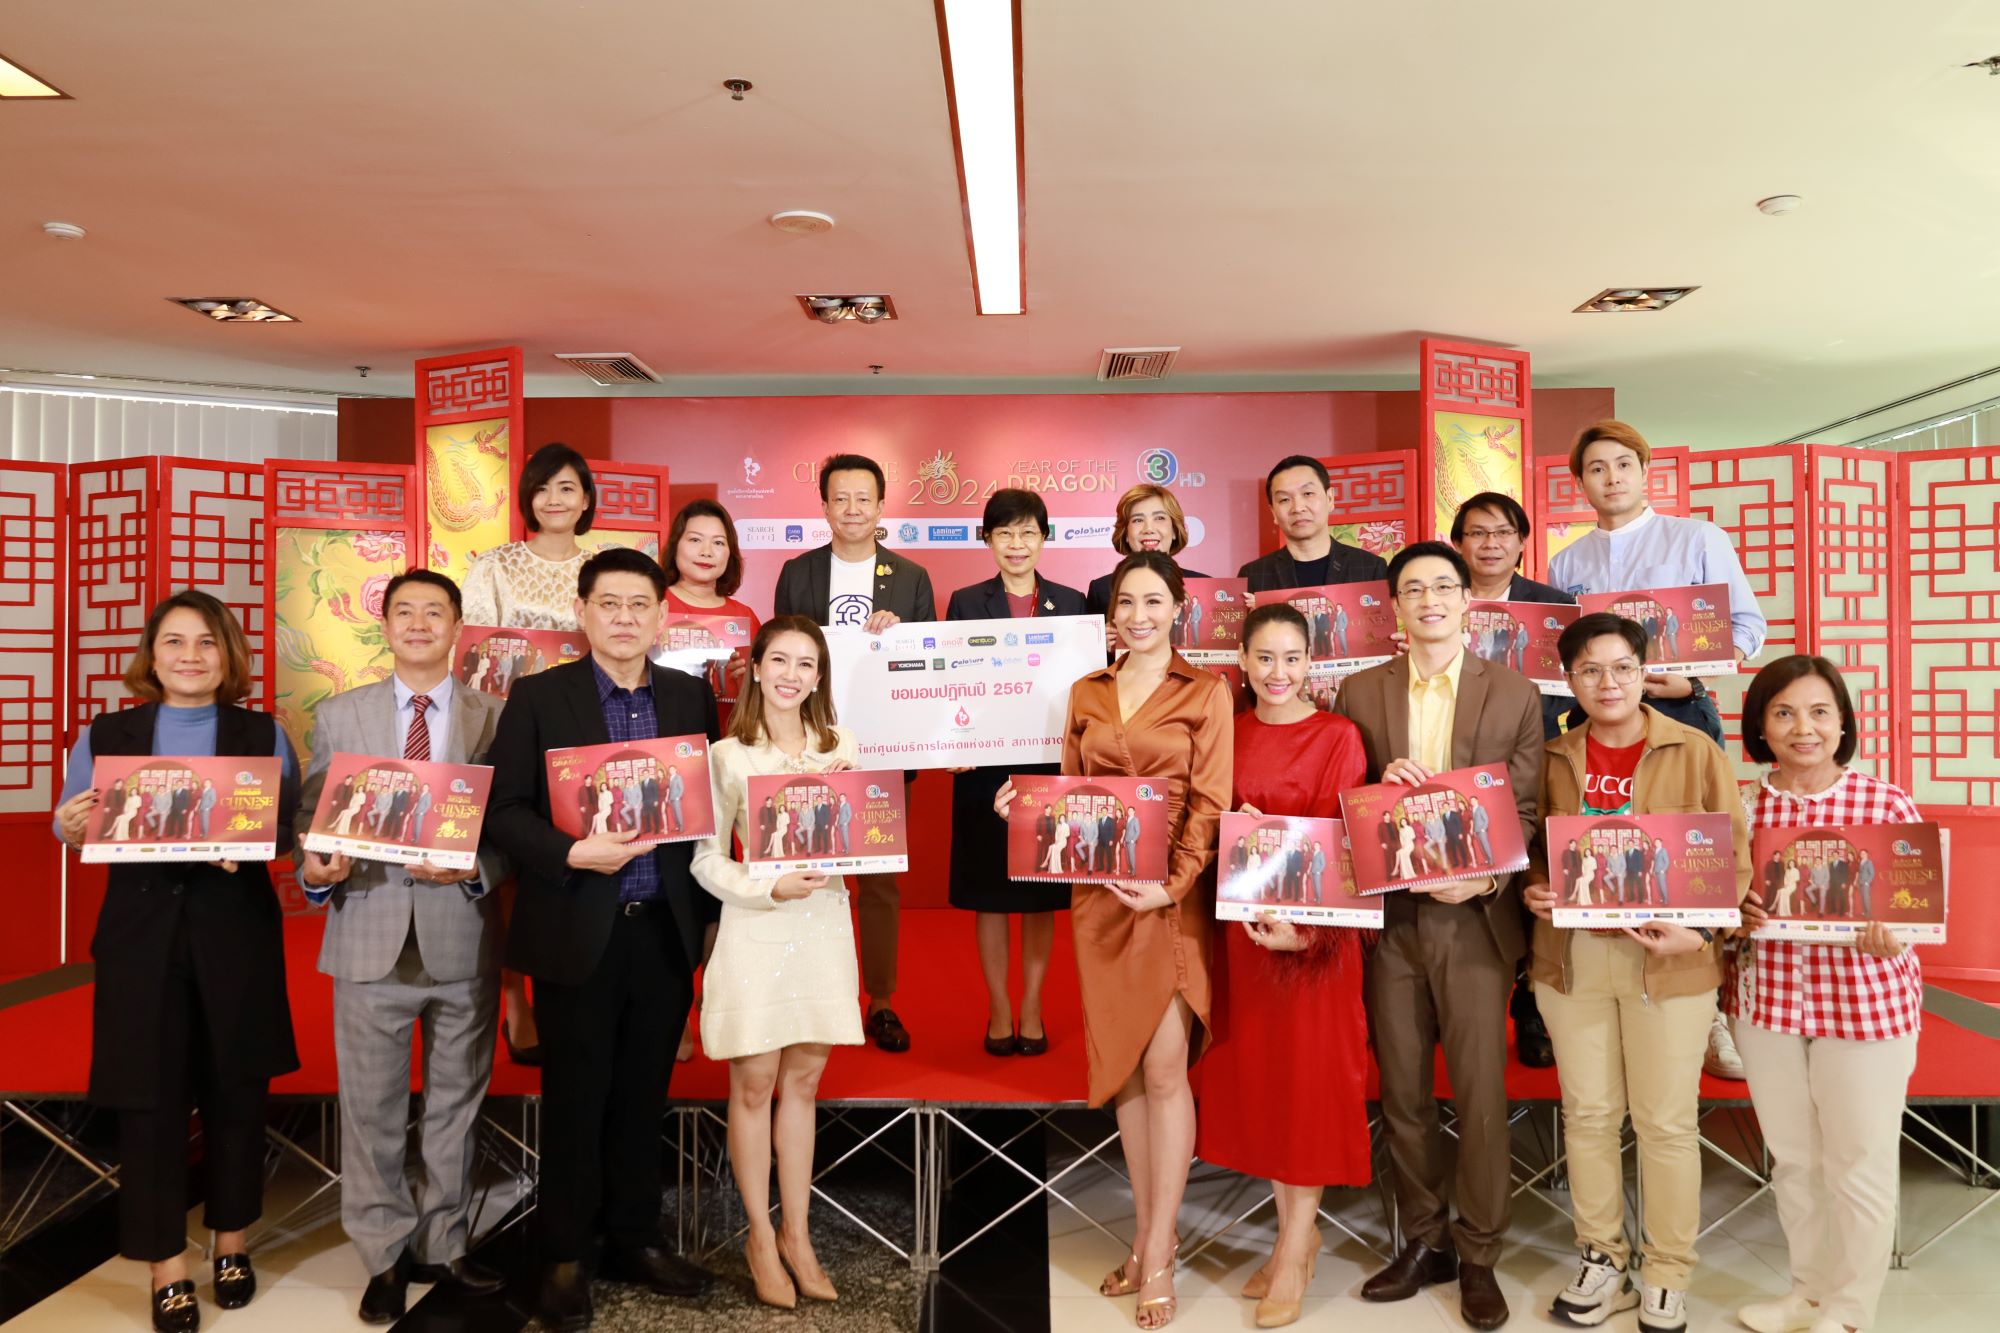 BEC and Search Handed Over Channel 3 Chinese Calendar to Thai Red Cross